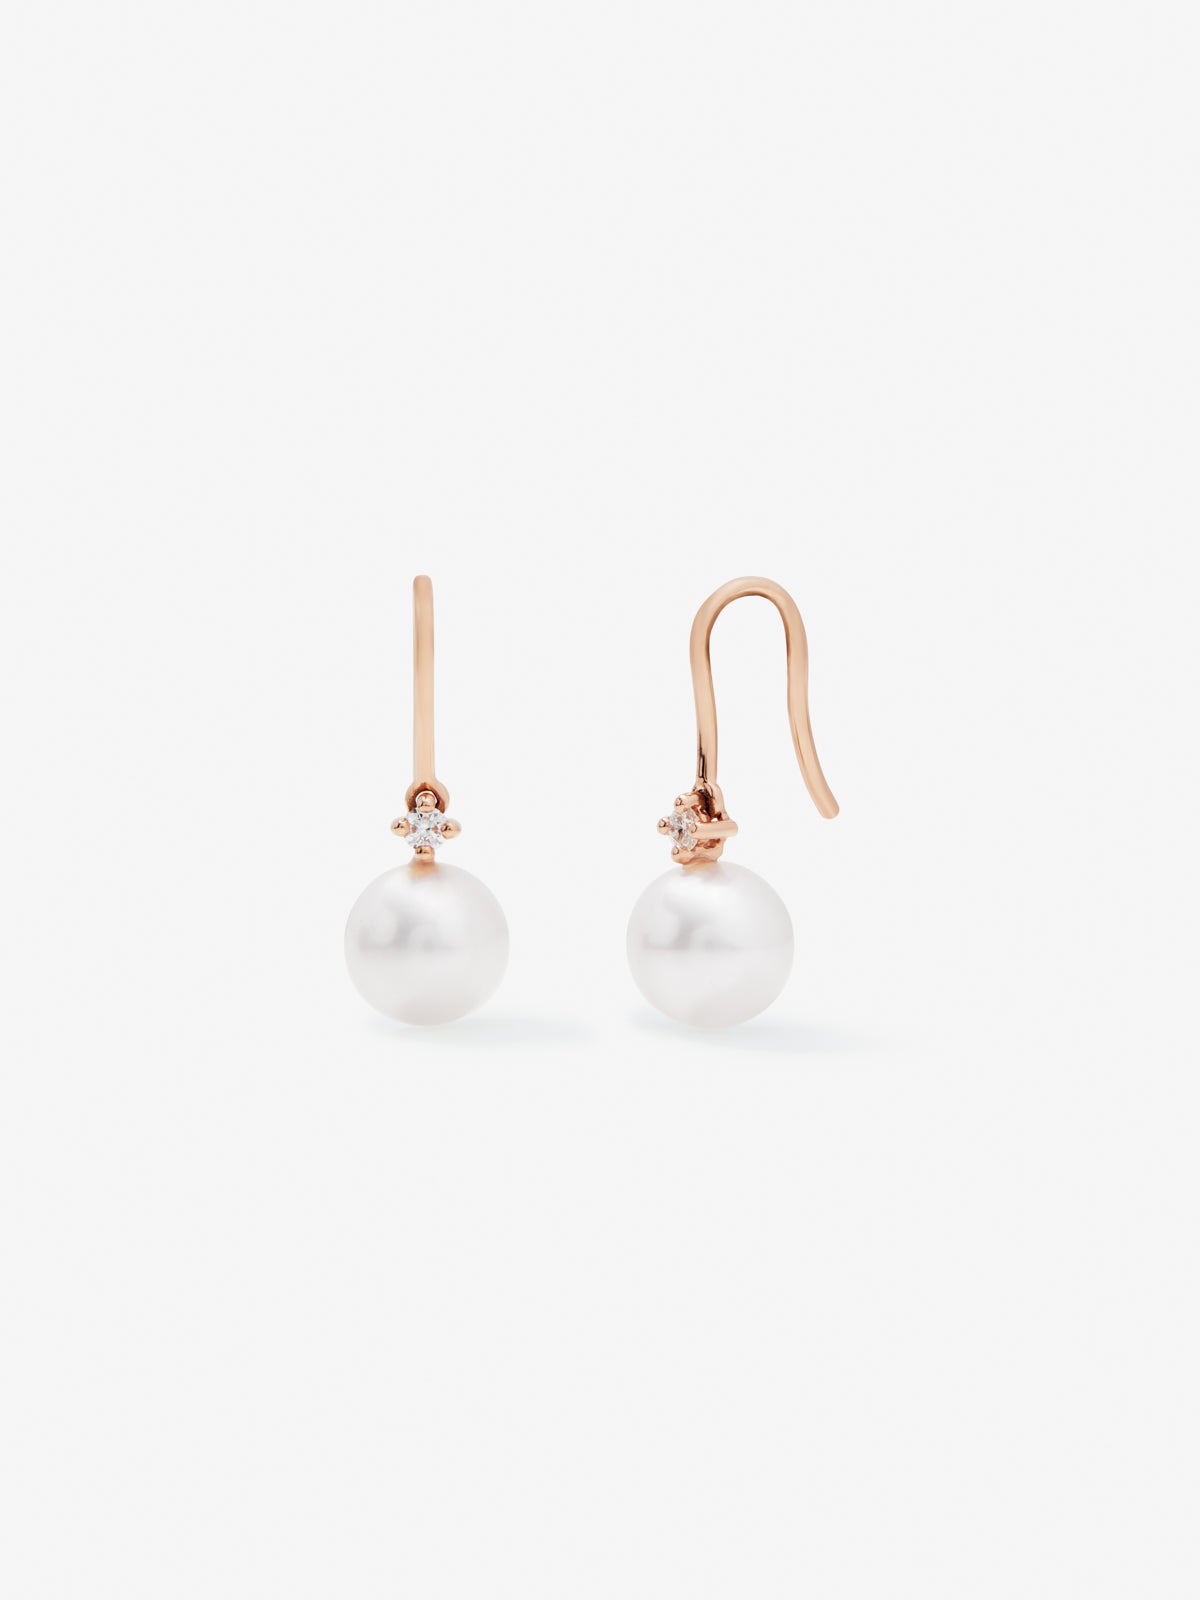 18k rose gold hanging earring with 8mm akoya pearl and diamond.